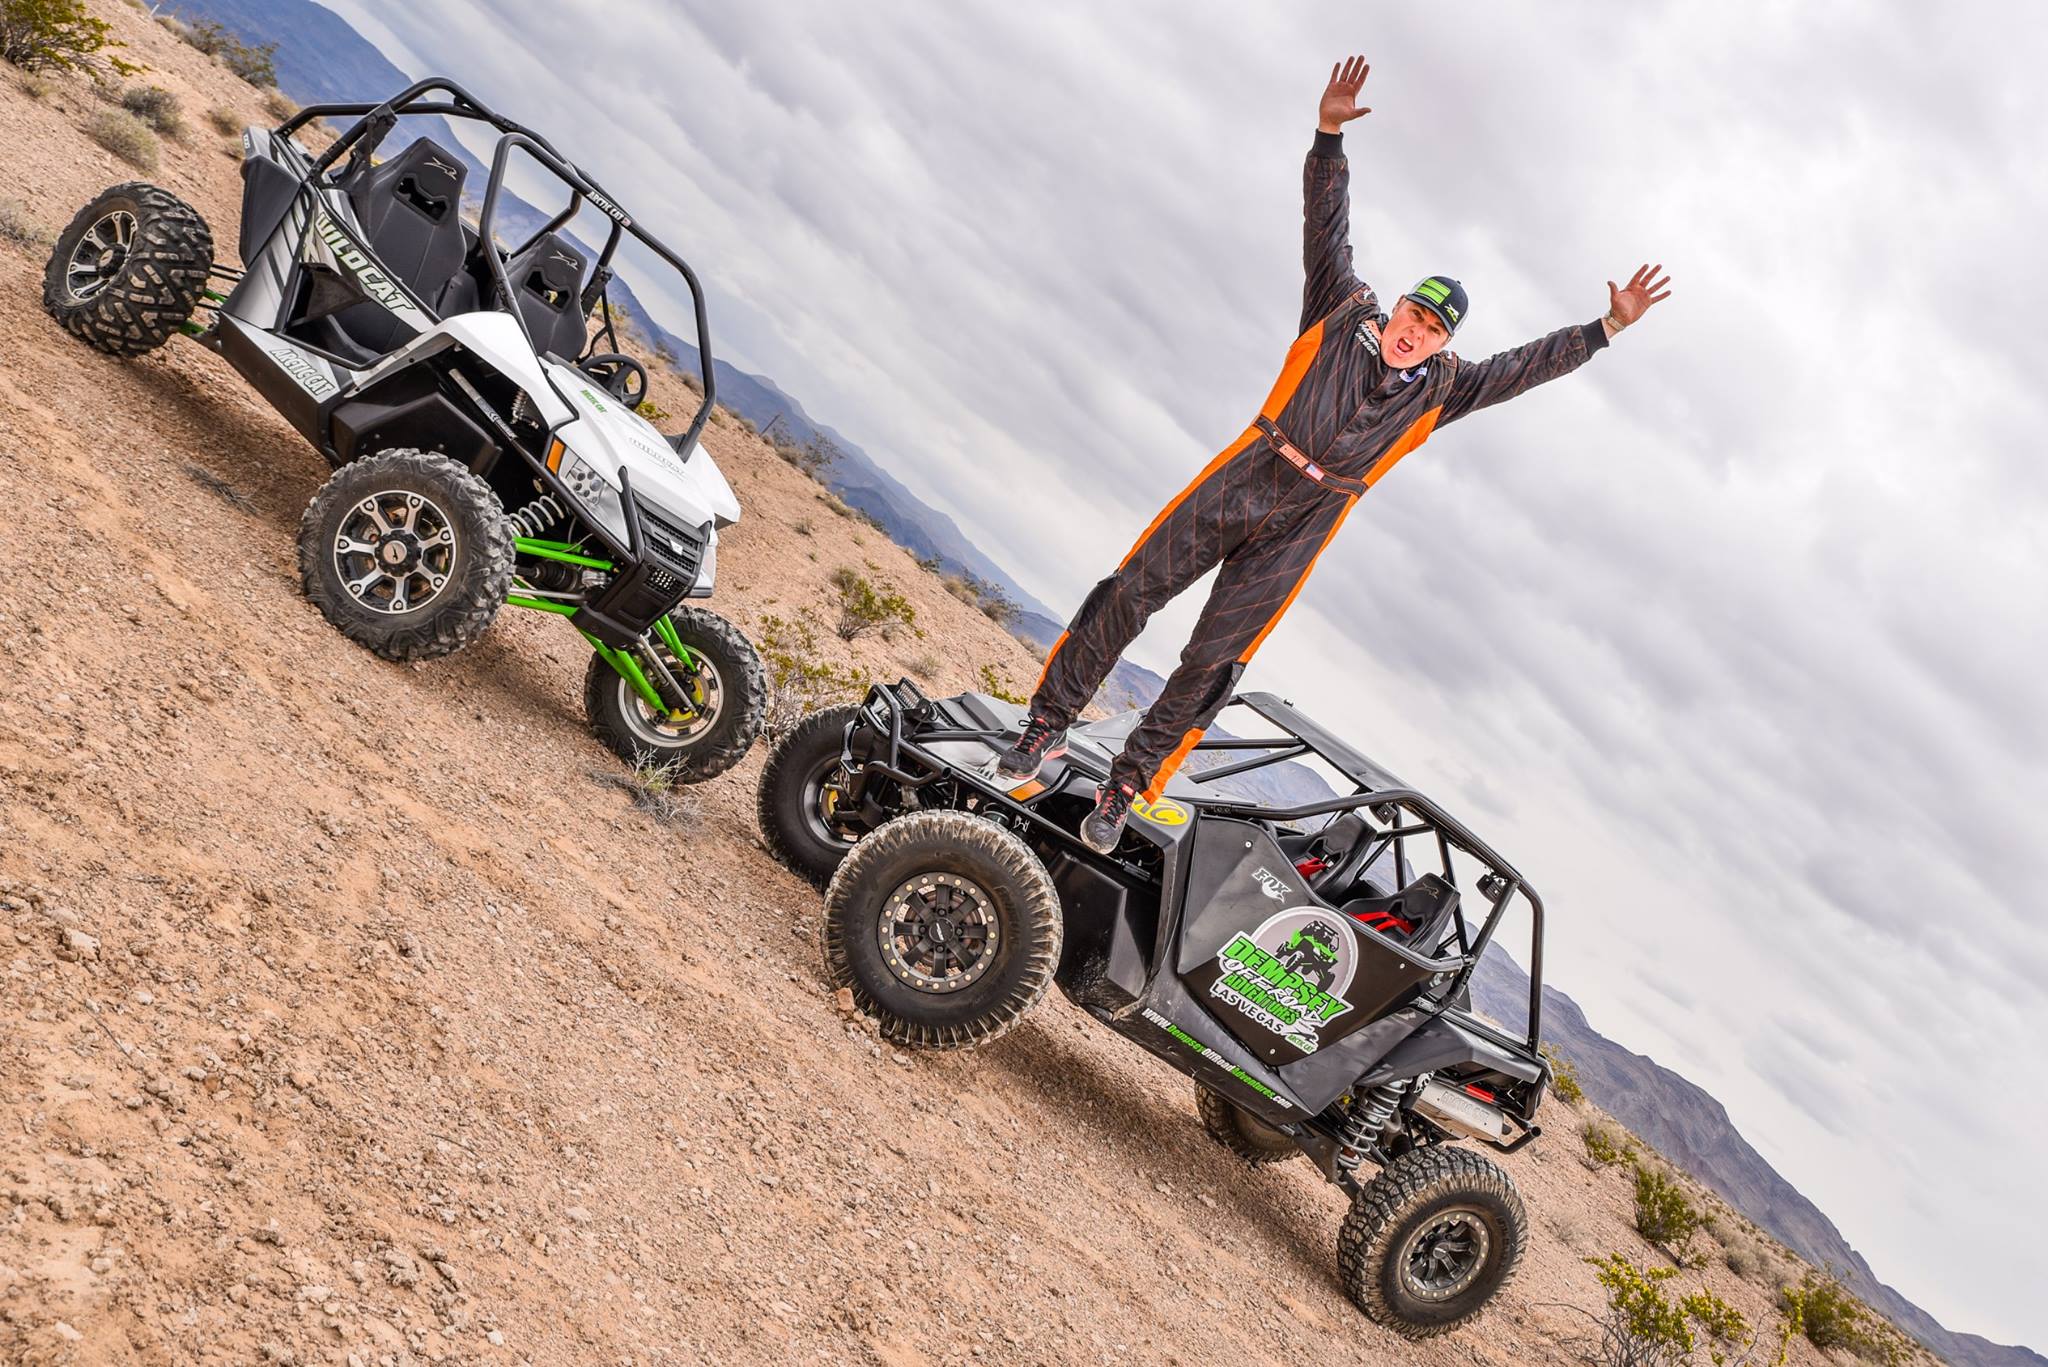 Arctic Cat partners with Chuck Dempsey.